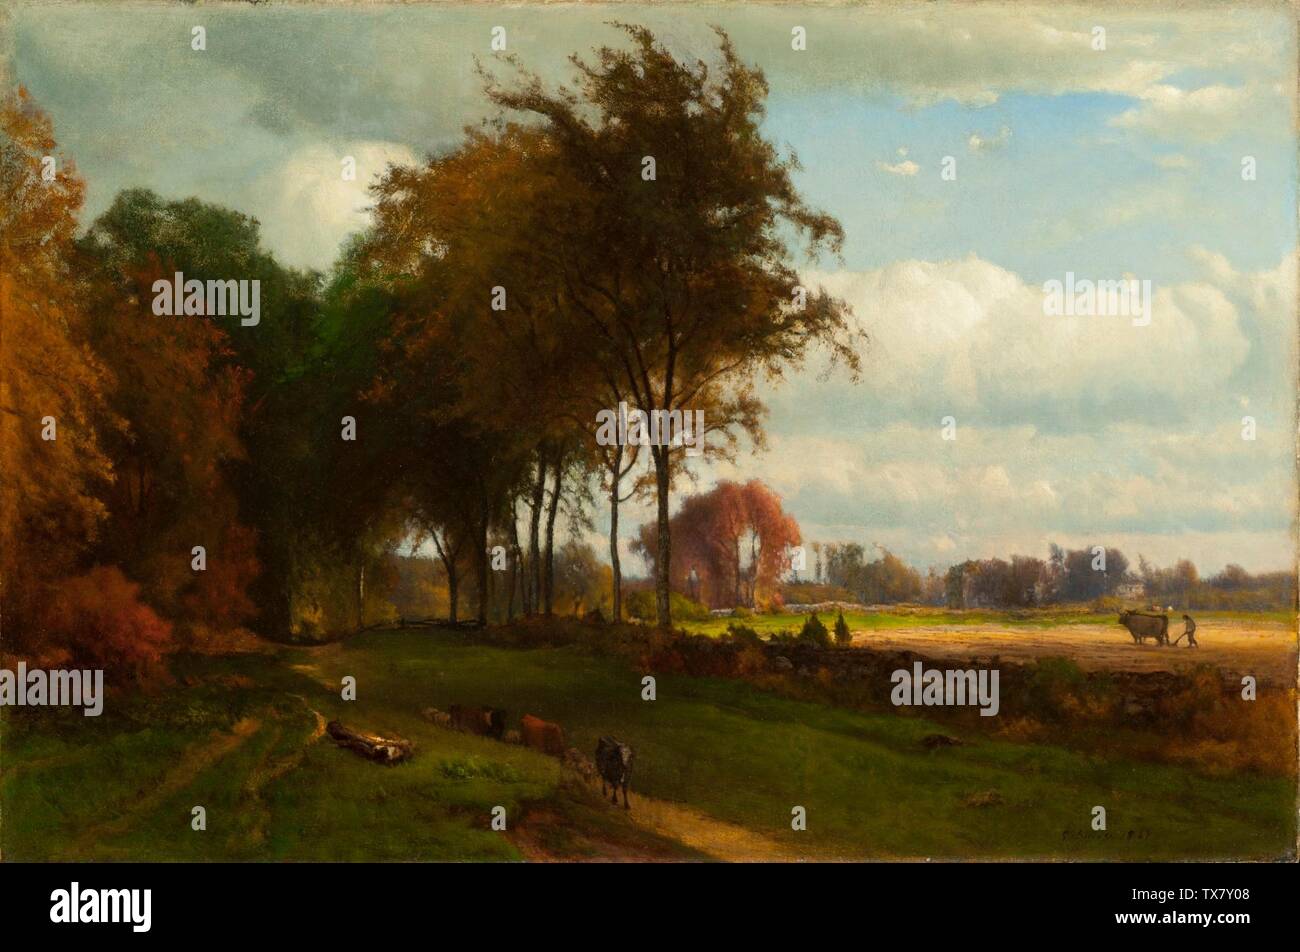 Landscape with Cattle (image 1 of 2);  United States, 1869 Paintings Oil on canvas 20 x 30 in. (50.8 x 76.2 cm) Gift of Dr. and Mrs. Christian Title (M.91.309.2) American Art Currently on public view: Art of the Americas Building, floor 3; 1869date QS:P571,+1869-00-00T00:00:00Z/9; Stock Photo